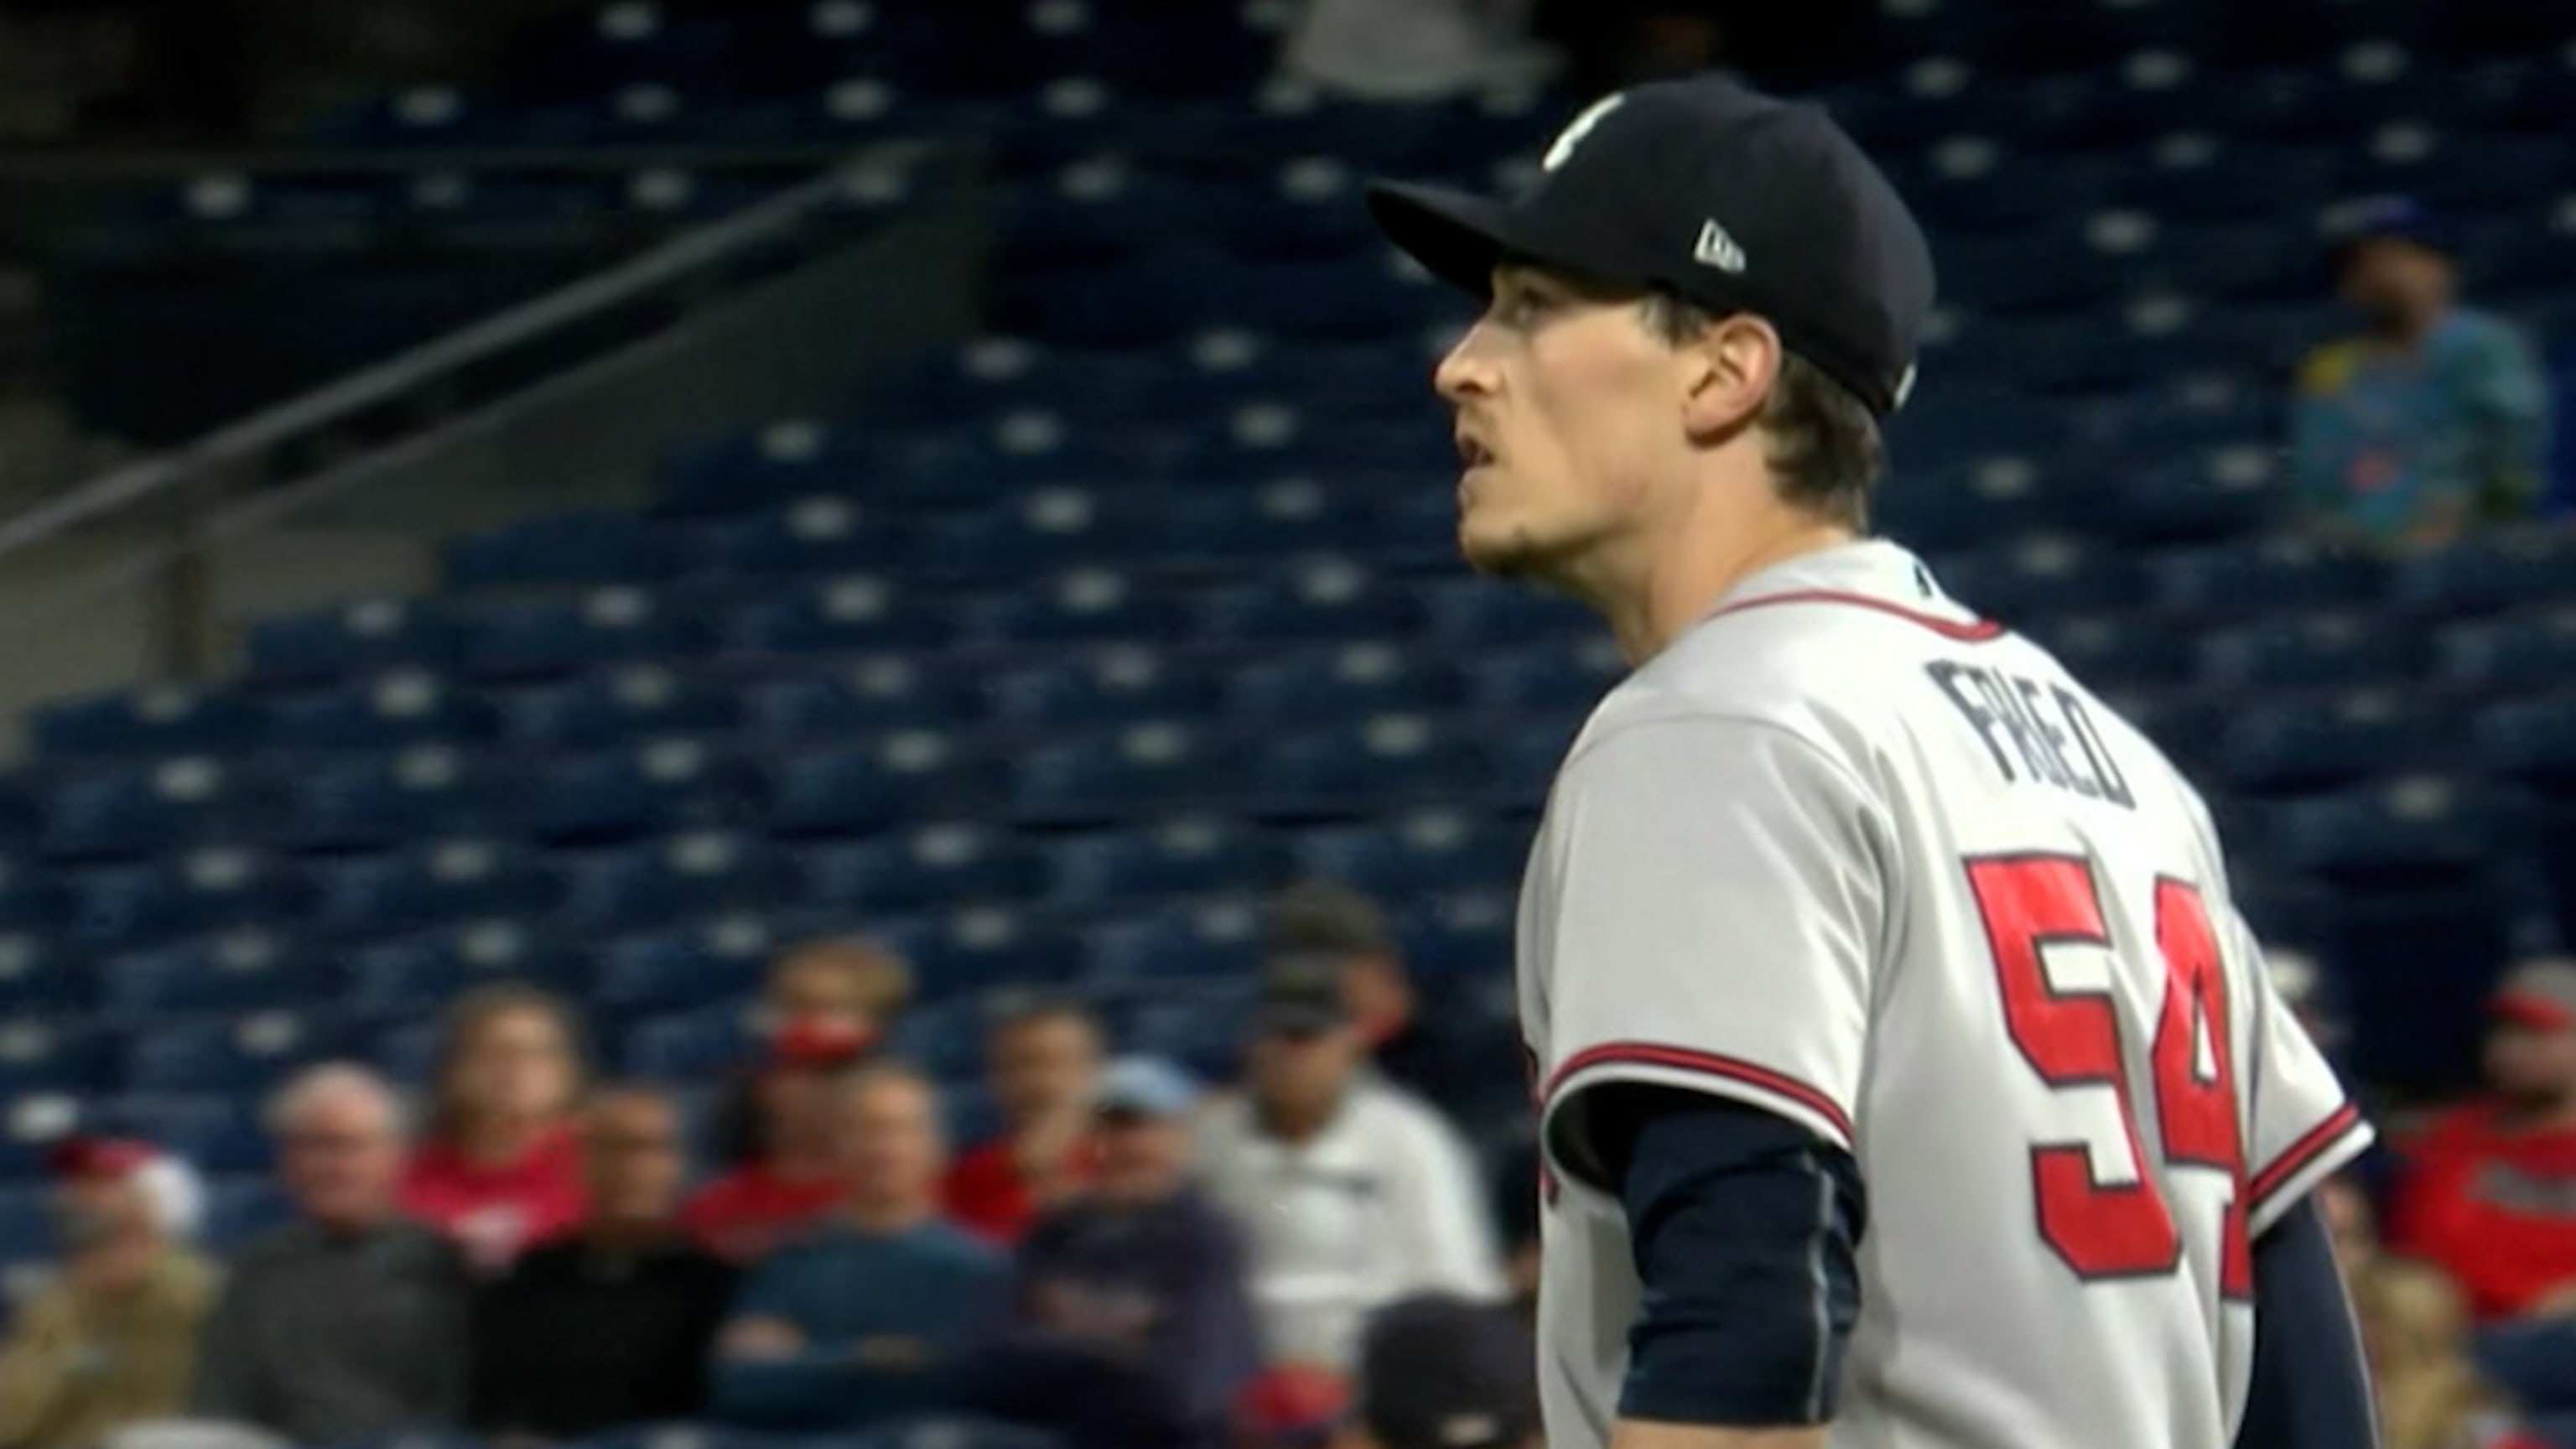 Max Fried will start Game 2 of World Series for Braves